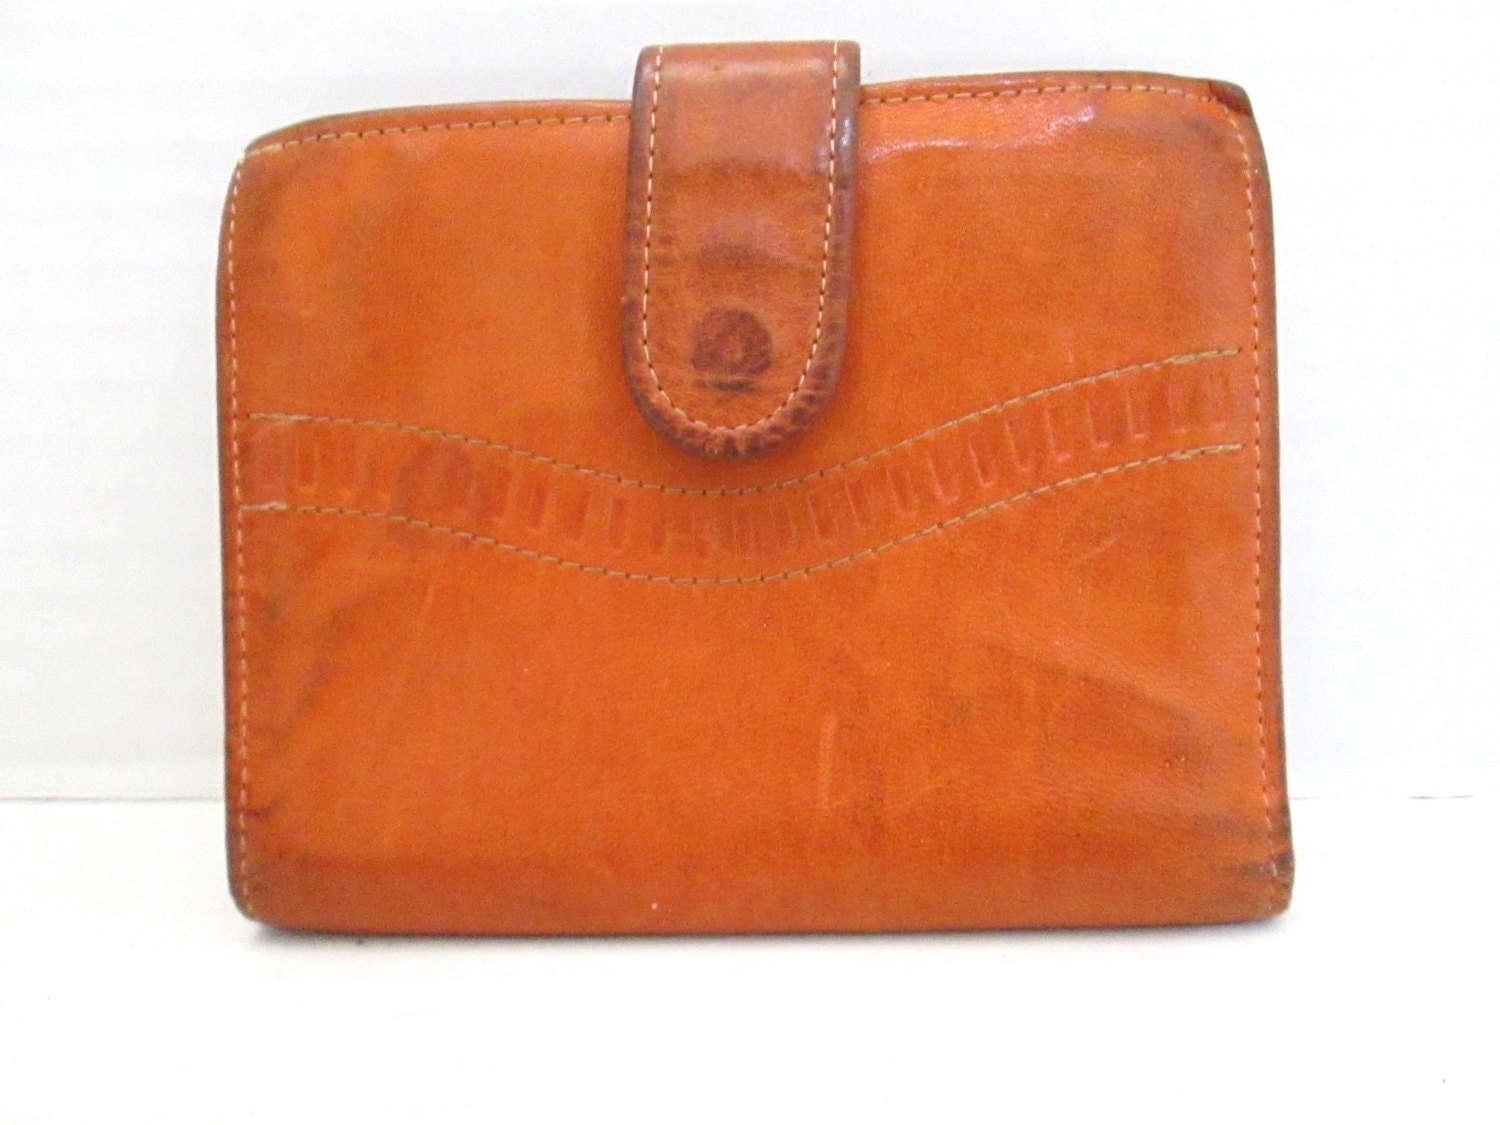 Women's Leather Wallet / Butter soft Leather / Camel Brown